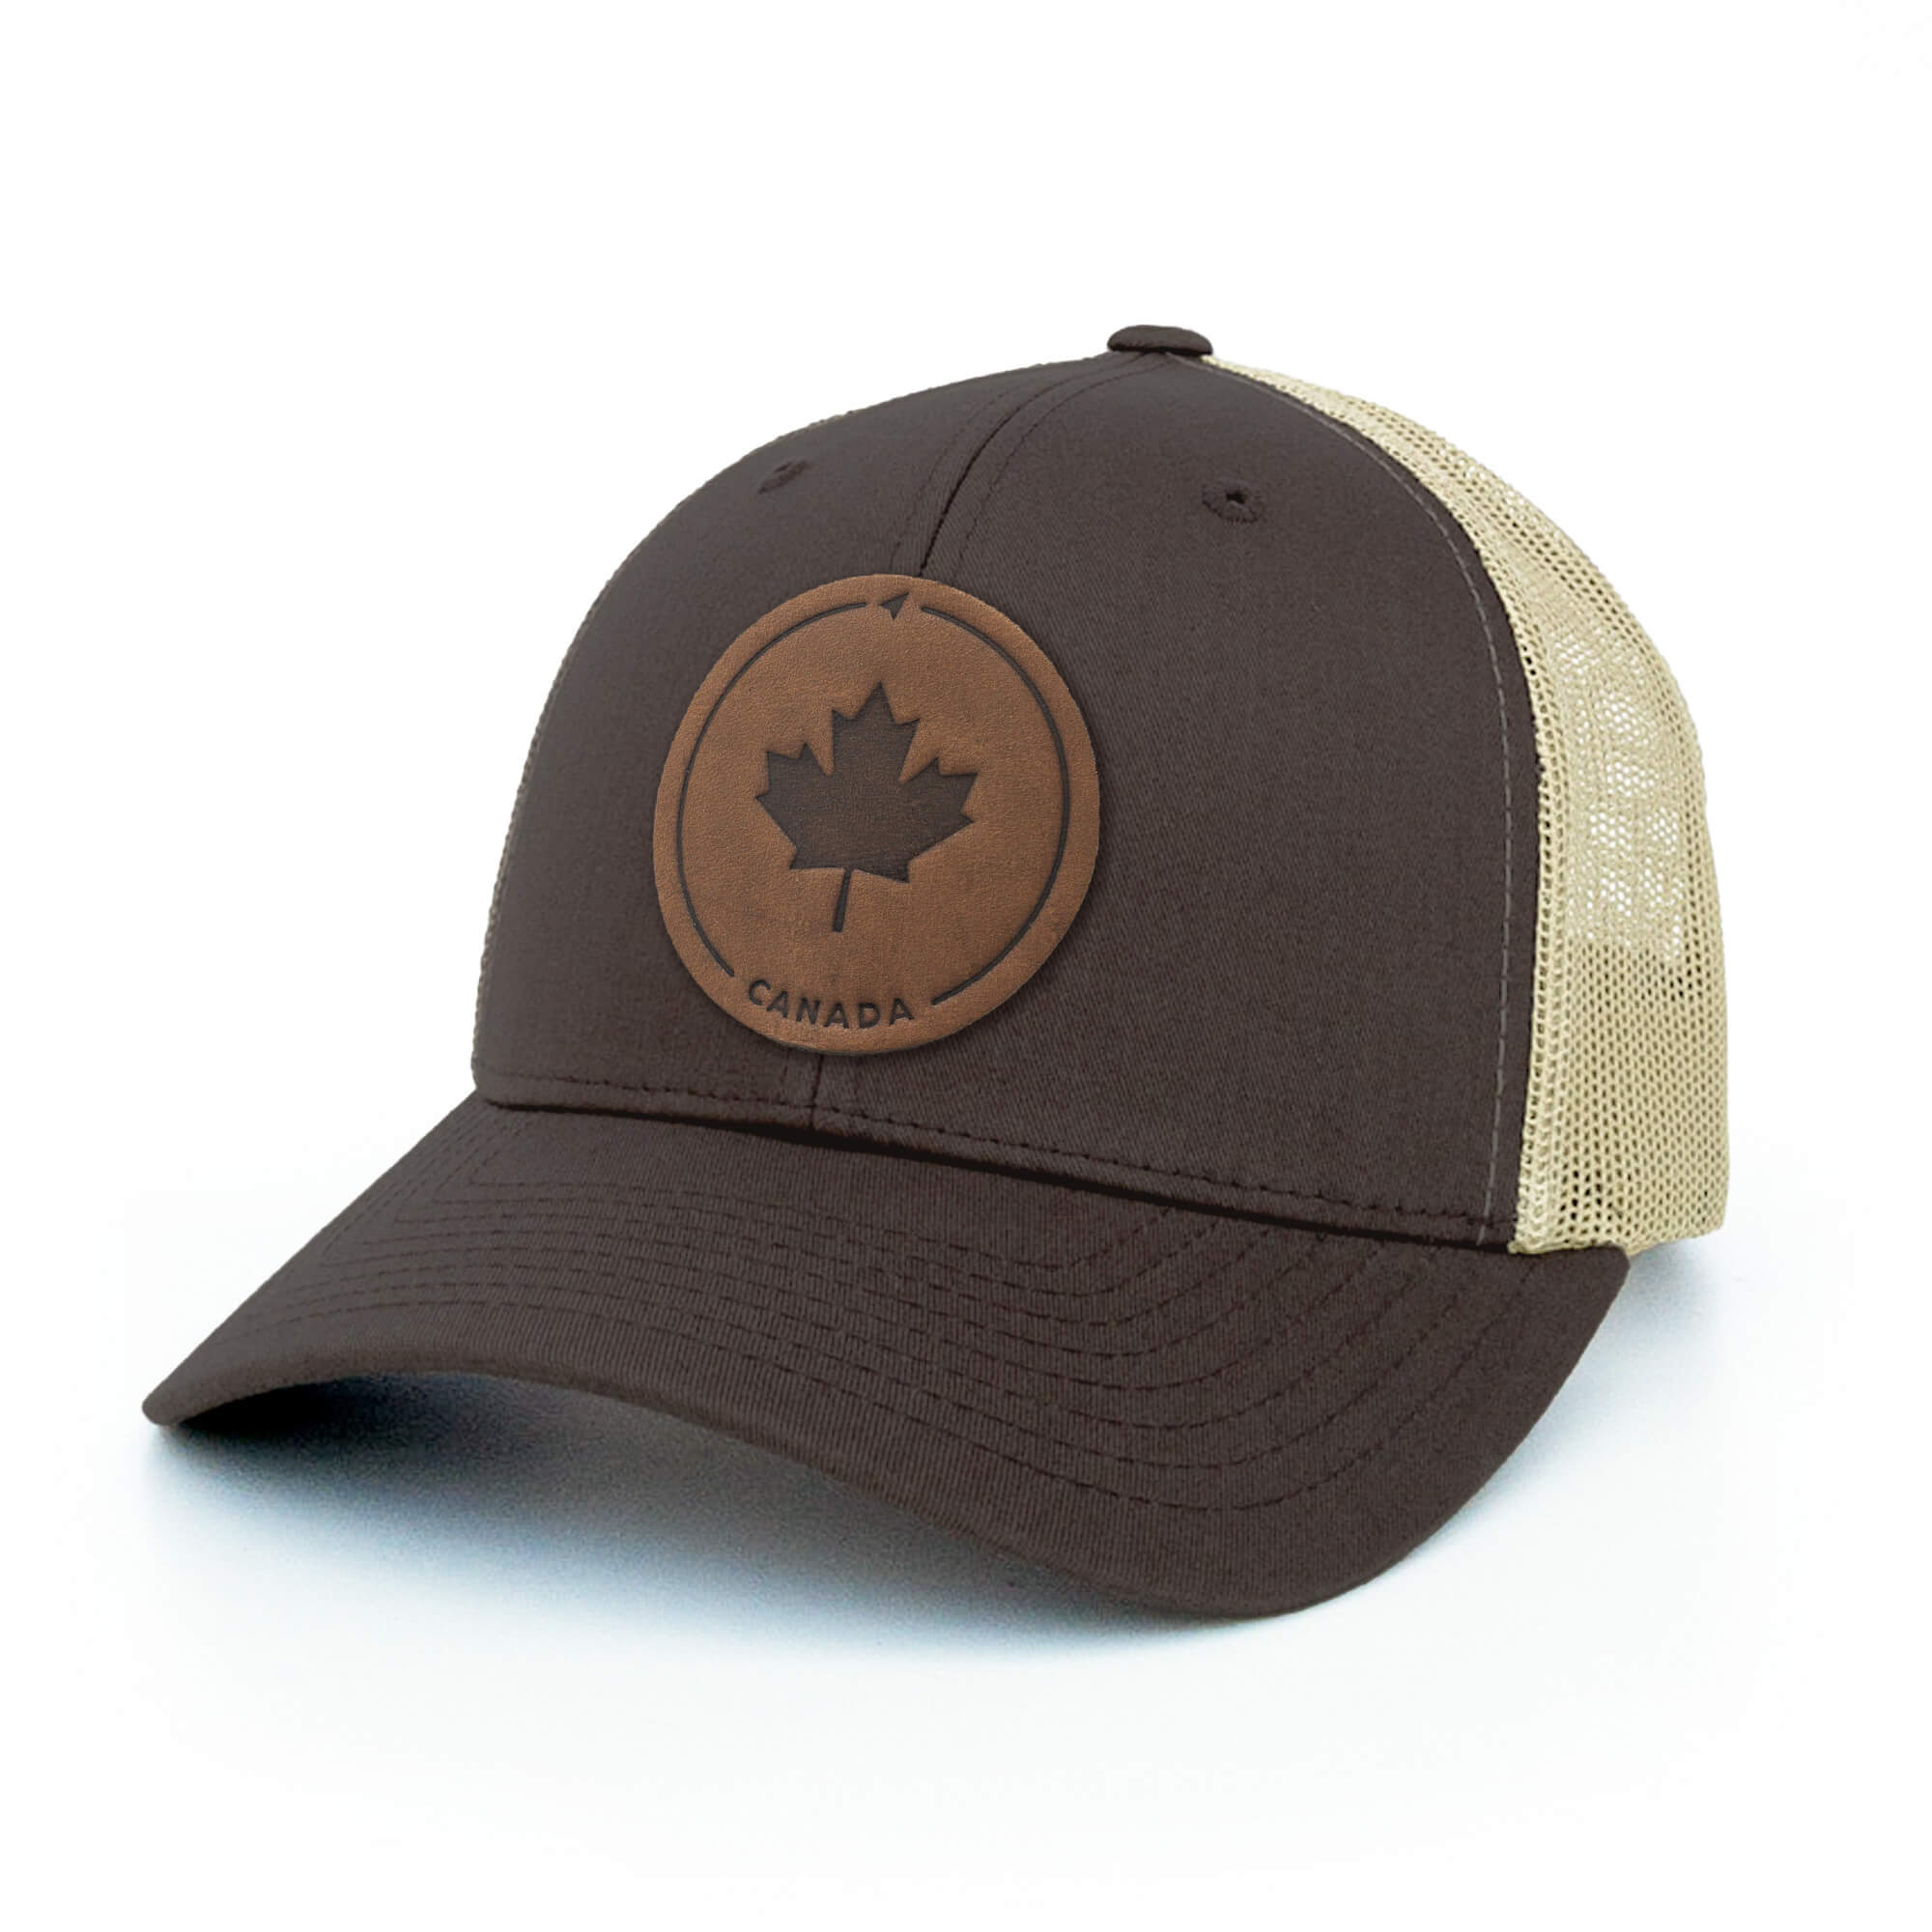 Brown and khaki trucker hat with full-grain leather patch of Maple Leaf | BLACK-002-001, CHARC-002-001, NAVY-002-001, HGREY-002-001, MOSS-002-001, BROWN-002-001, RED-002-001